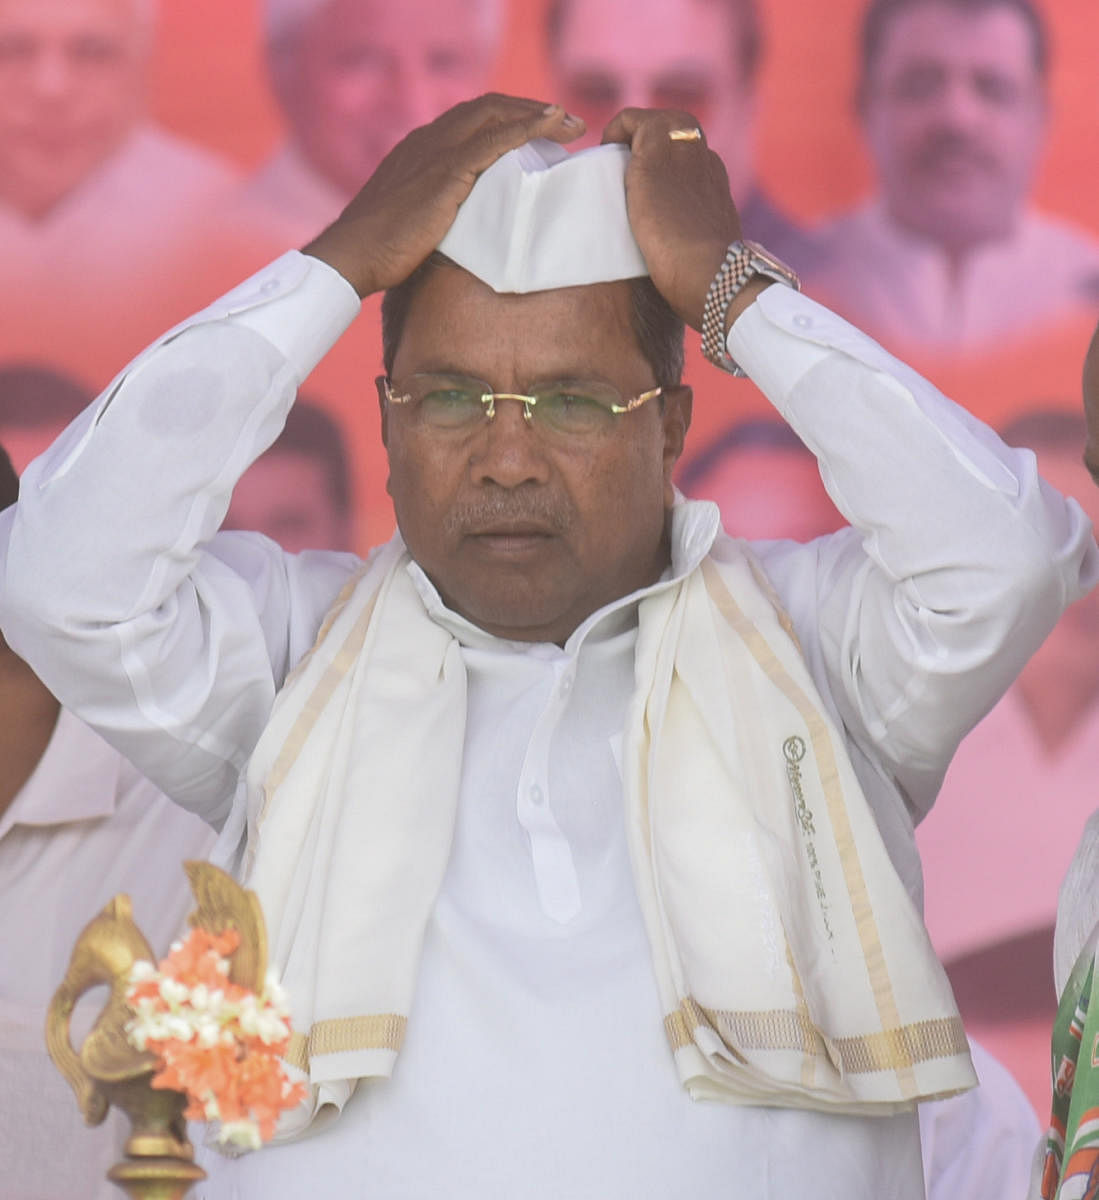 CM Siddaramaiah in Davanagere on Friday. DH Photo by Anup R. Thippeswamy.